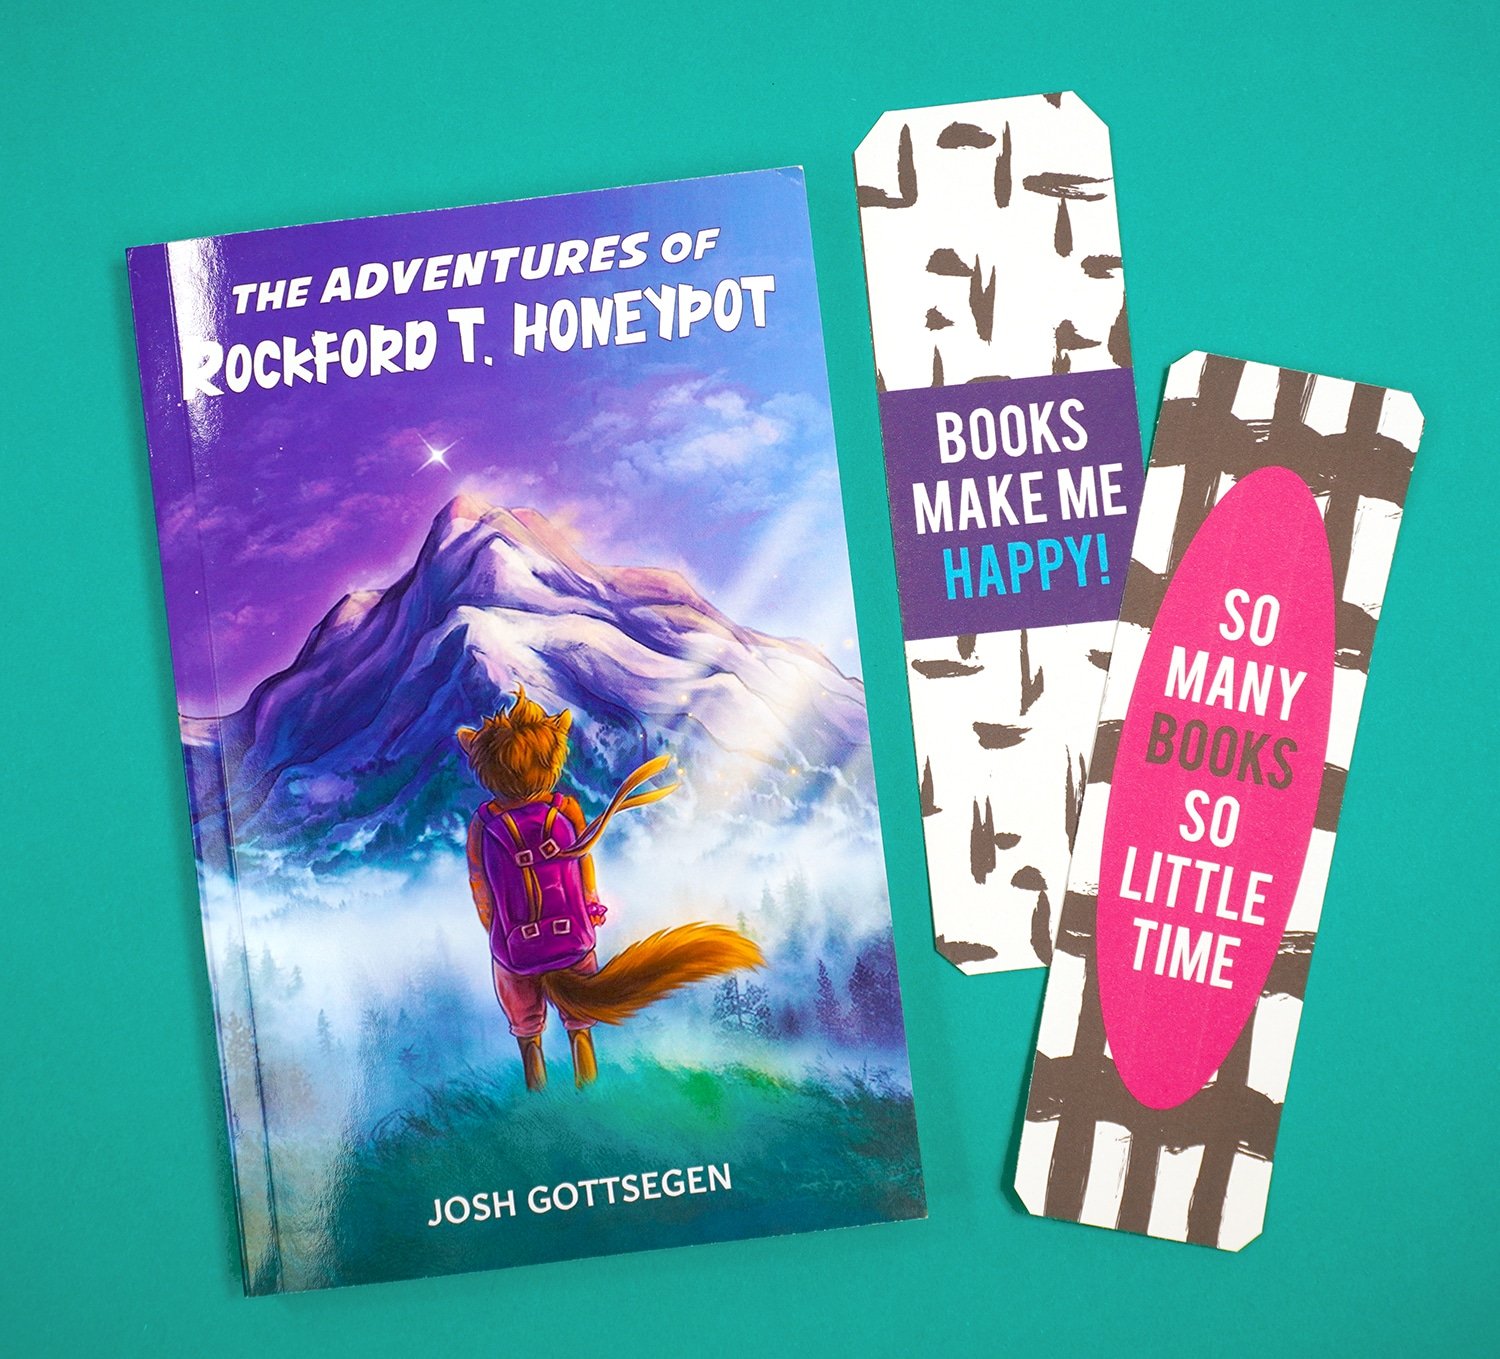 \"The Adventures of Rockford T. Honeypot\" book and printable bookmarks on teal background